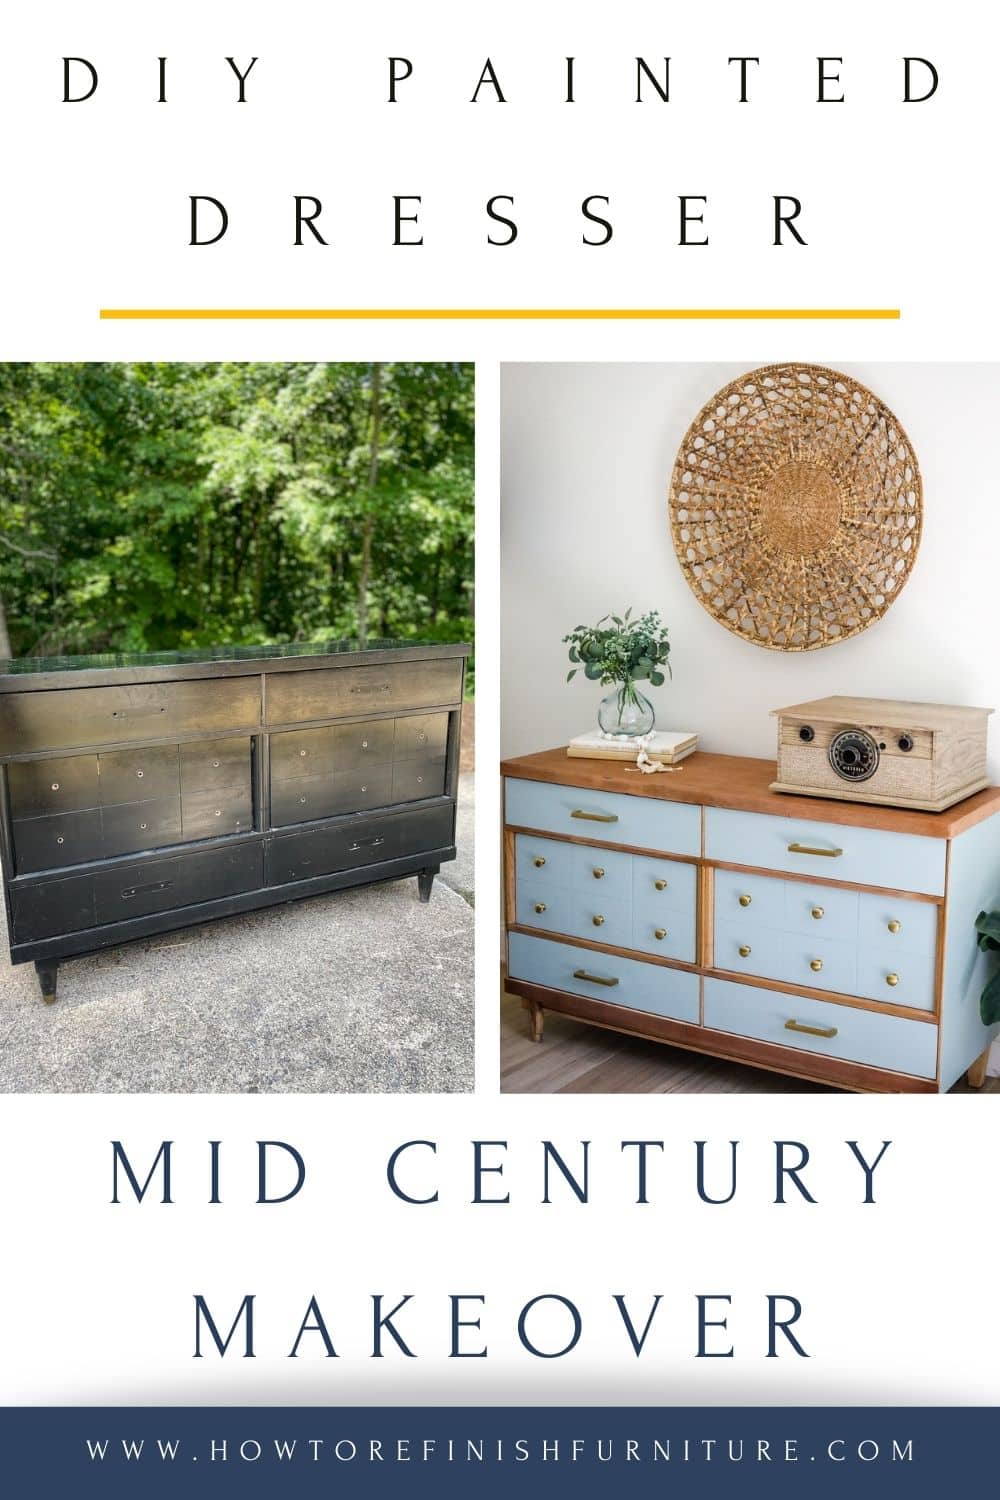 before and after image collage of mid century painted dresser